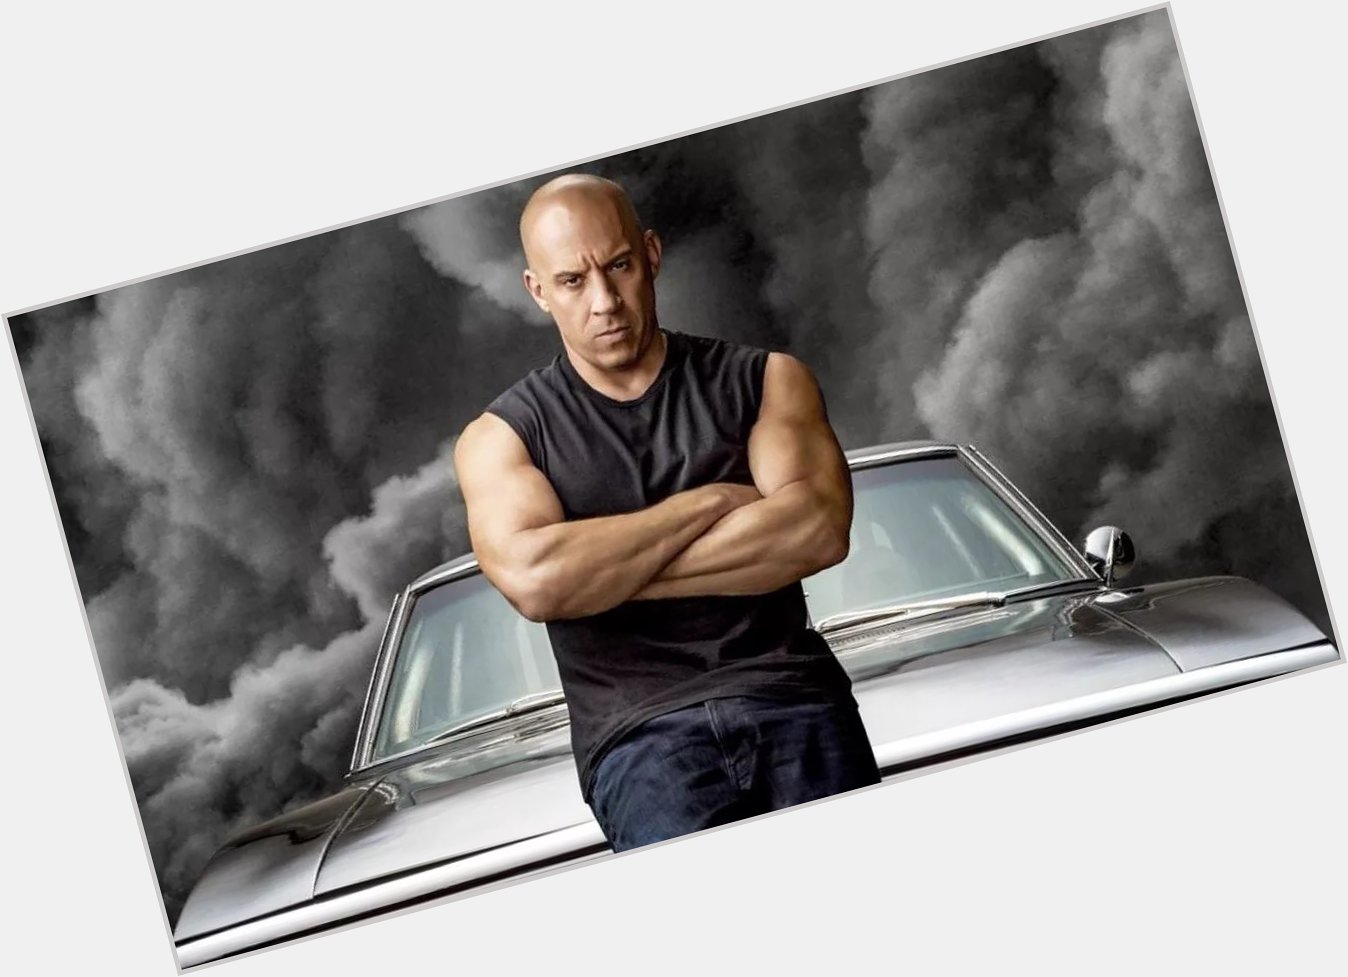 Happy Birthday to Vin Diesel The movie superstar turns 54 years old today 